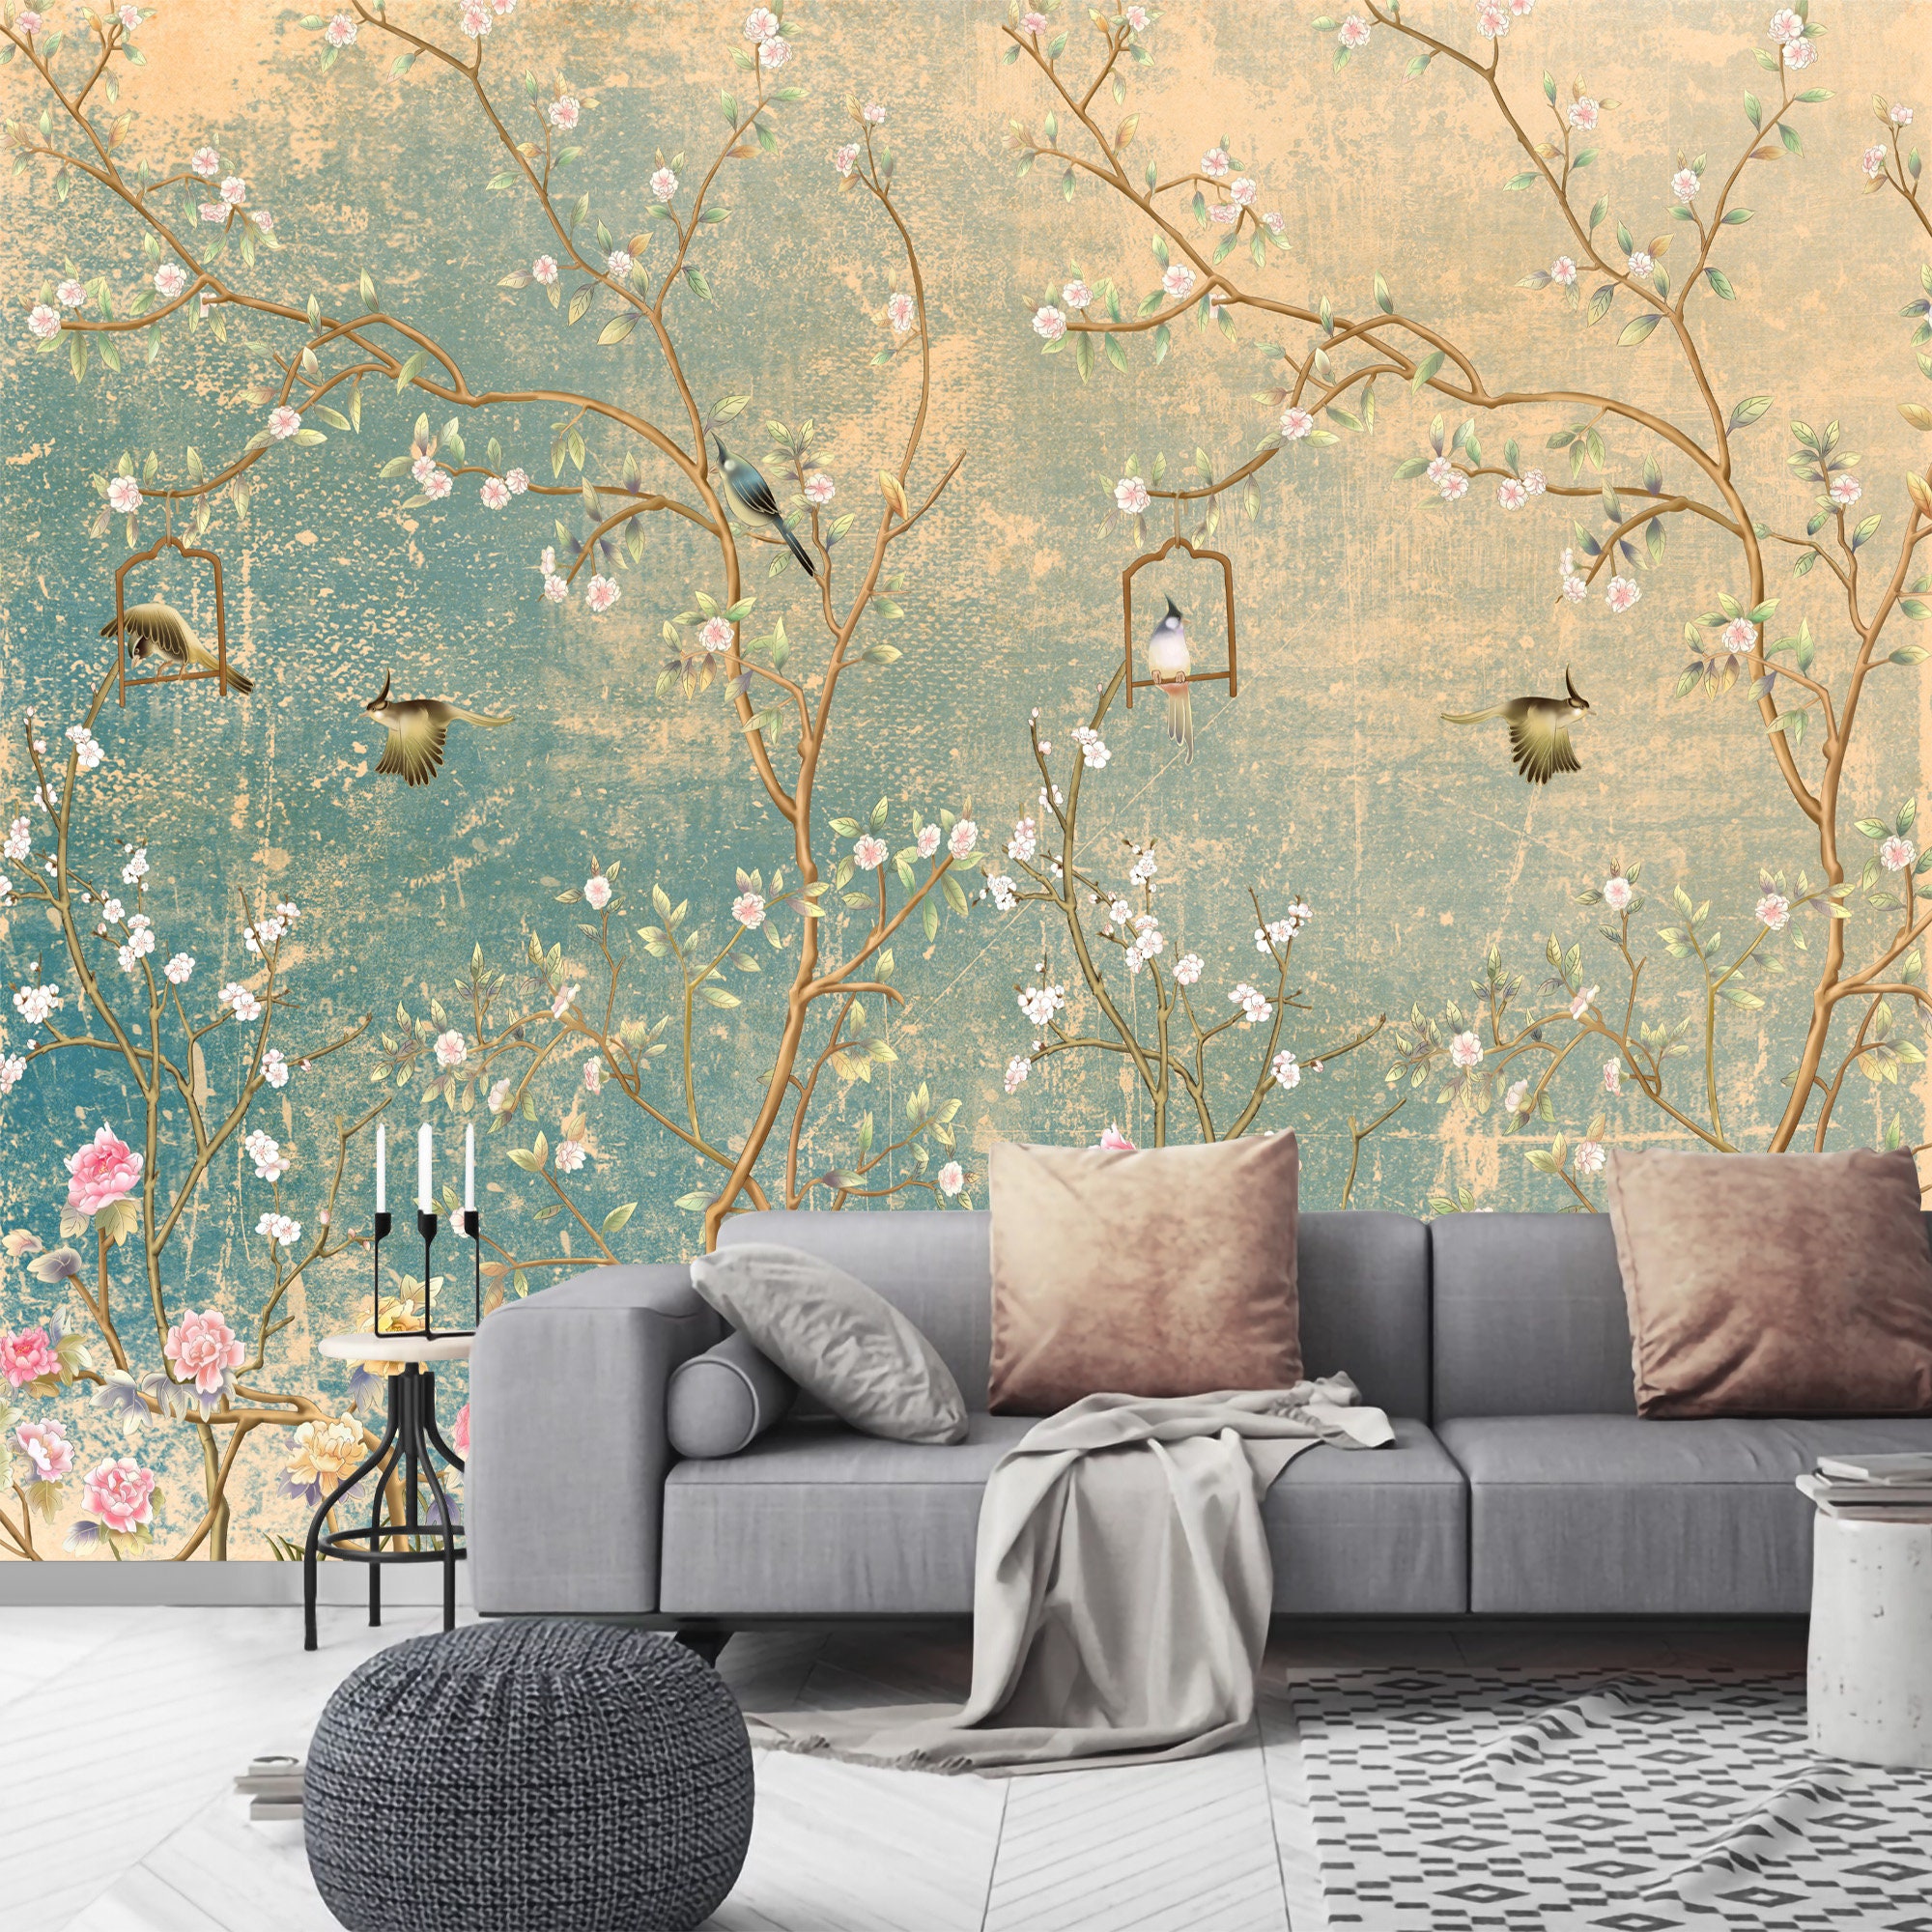 Temporary wall art Home decor Peel and stick Birds wallpaper Colorful birds self adhesive removable wall mural Wall decor Wall Art